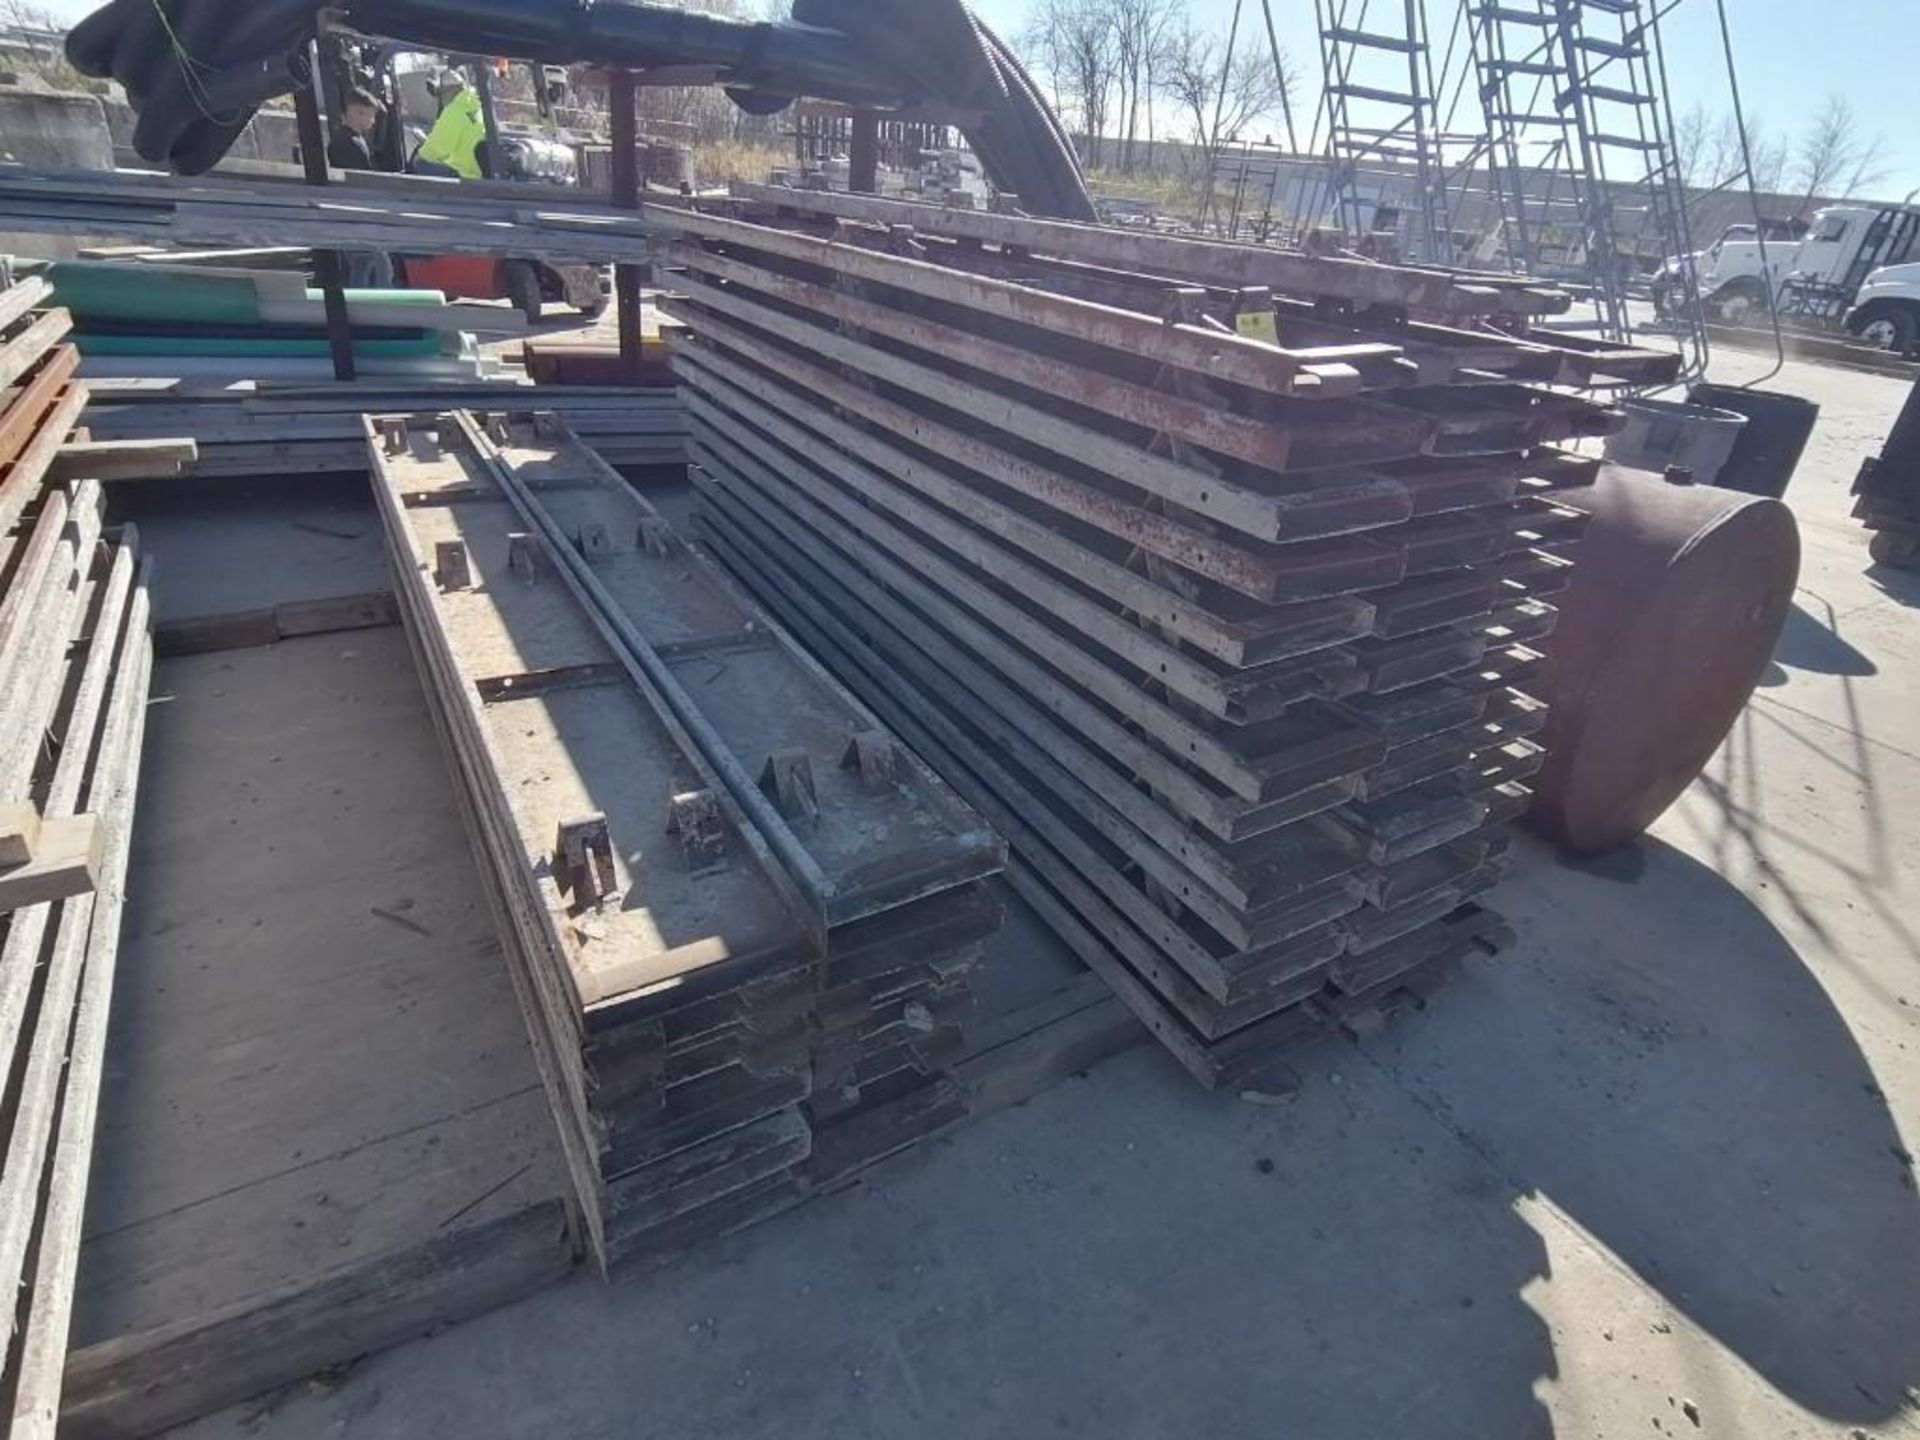 (52) 12" x 2" x 10' Steel Paving Forms. Located in Hazelwood, MO.